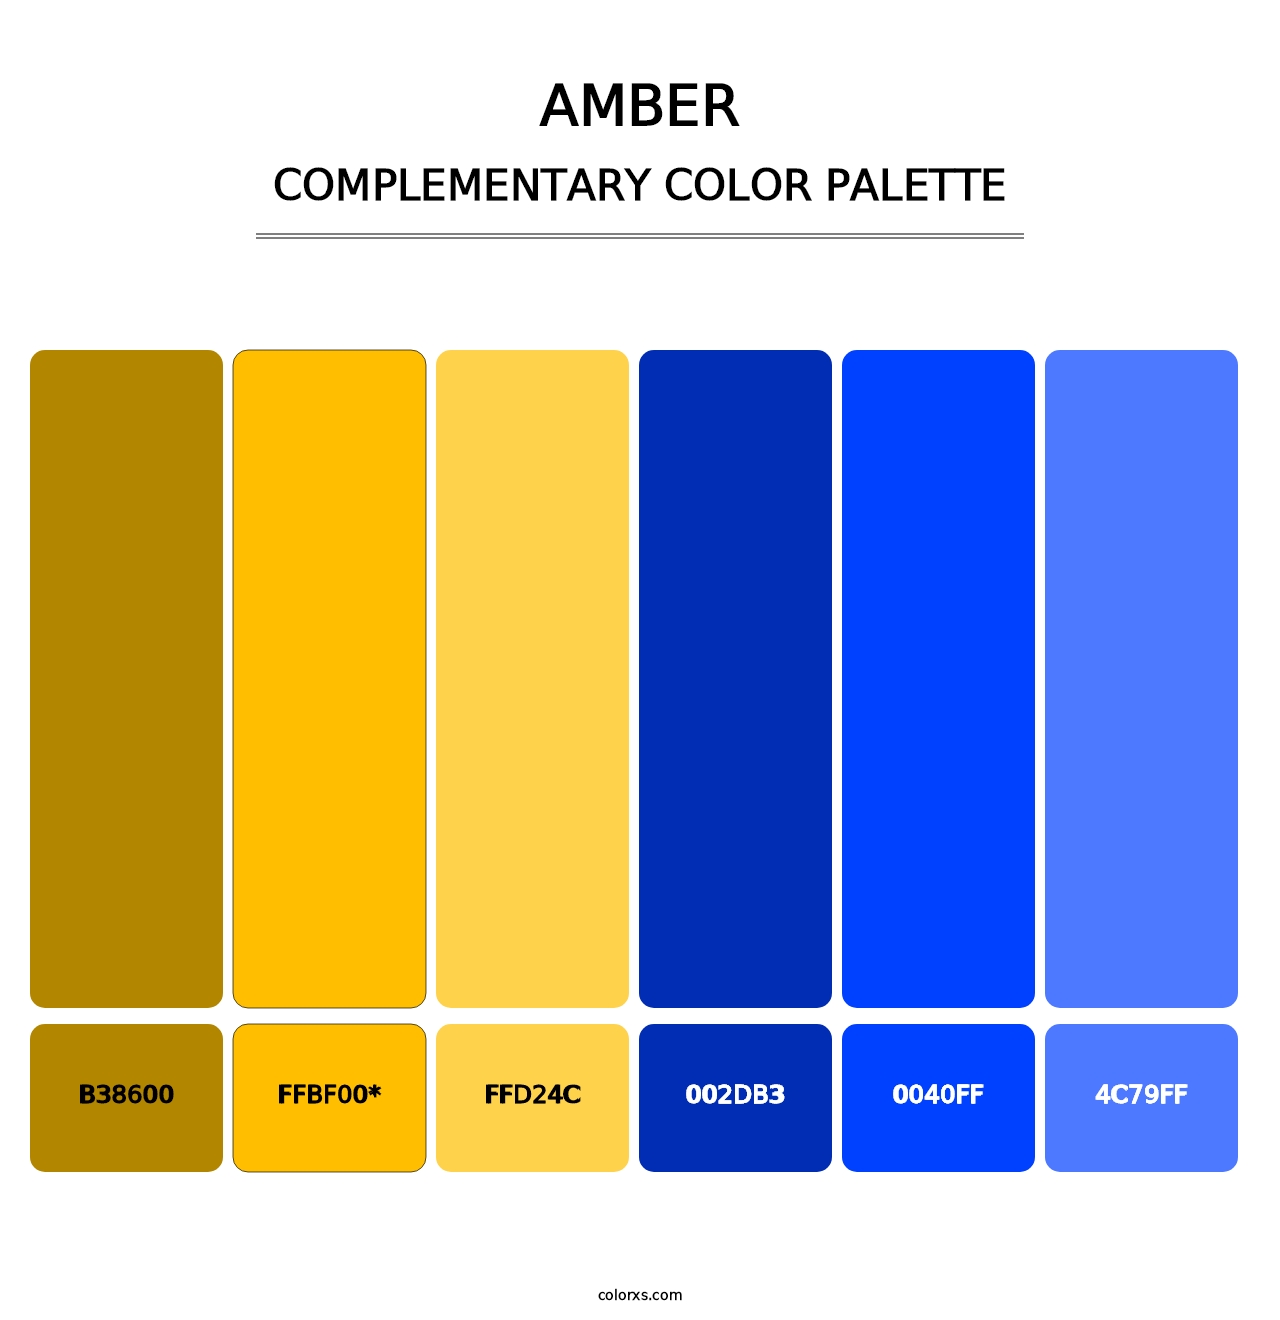 Amber - Complementary Color Palette